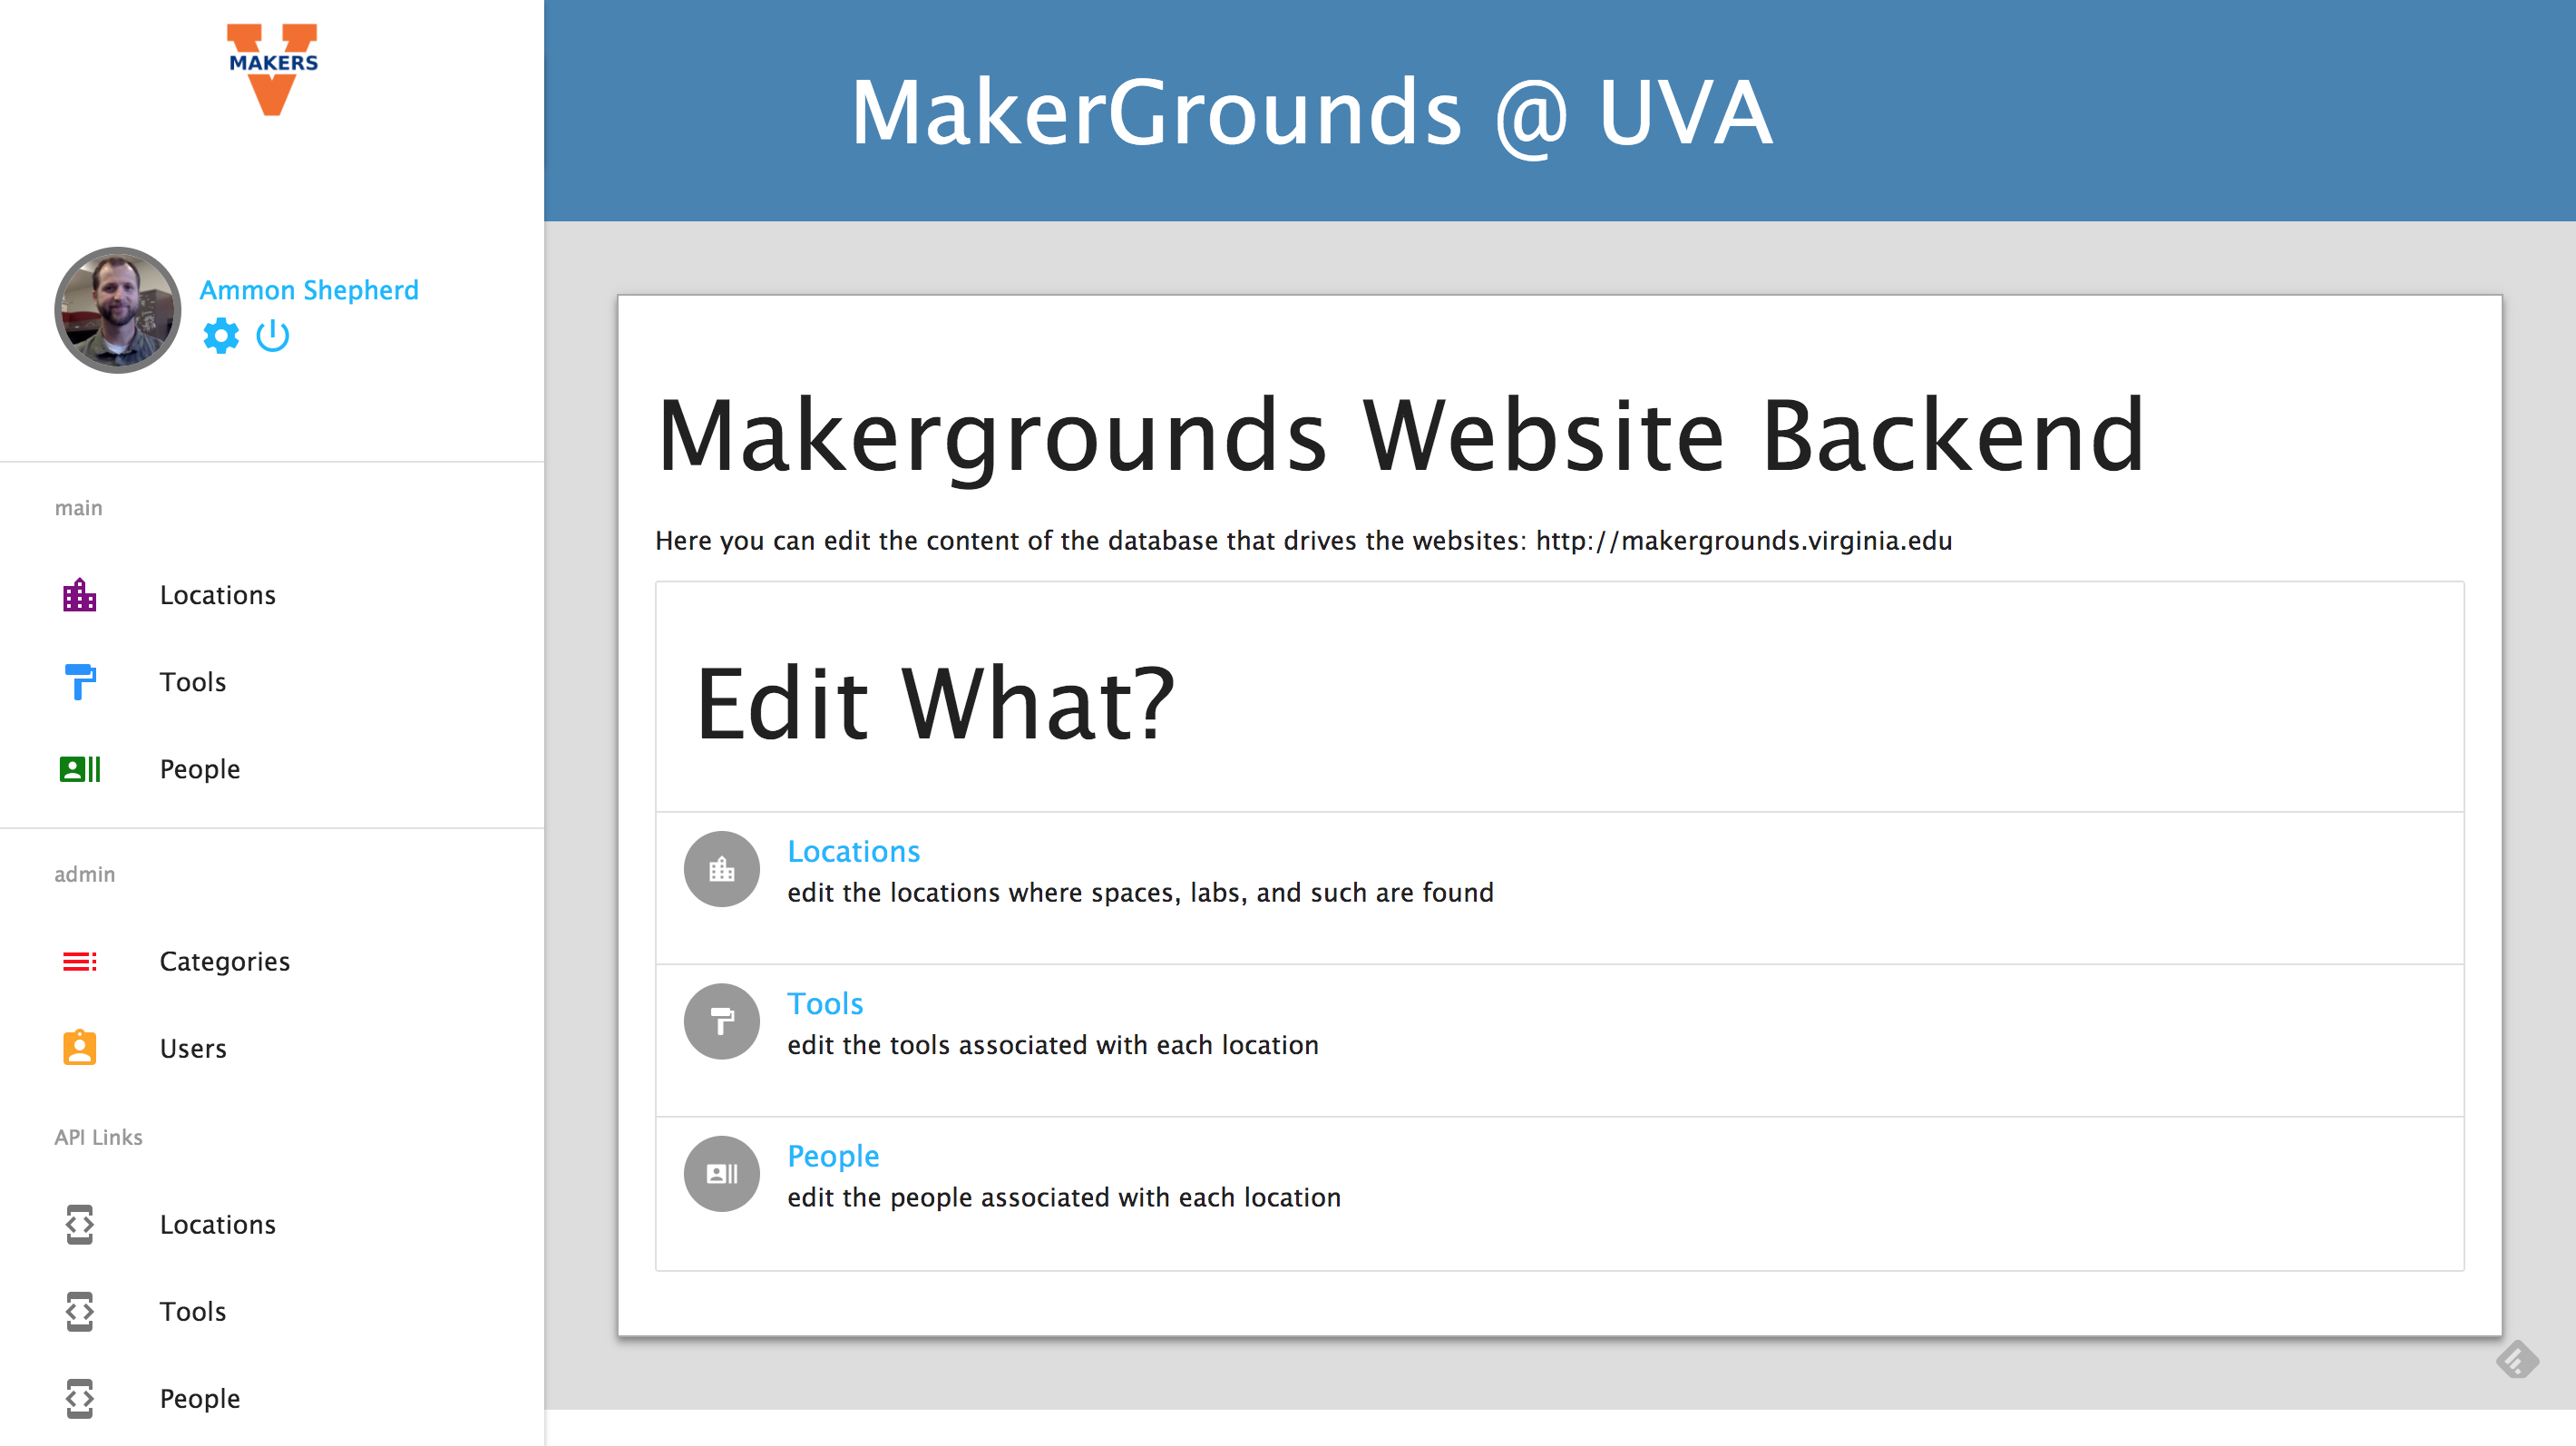 Image of the Makergrounds backend admin website.